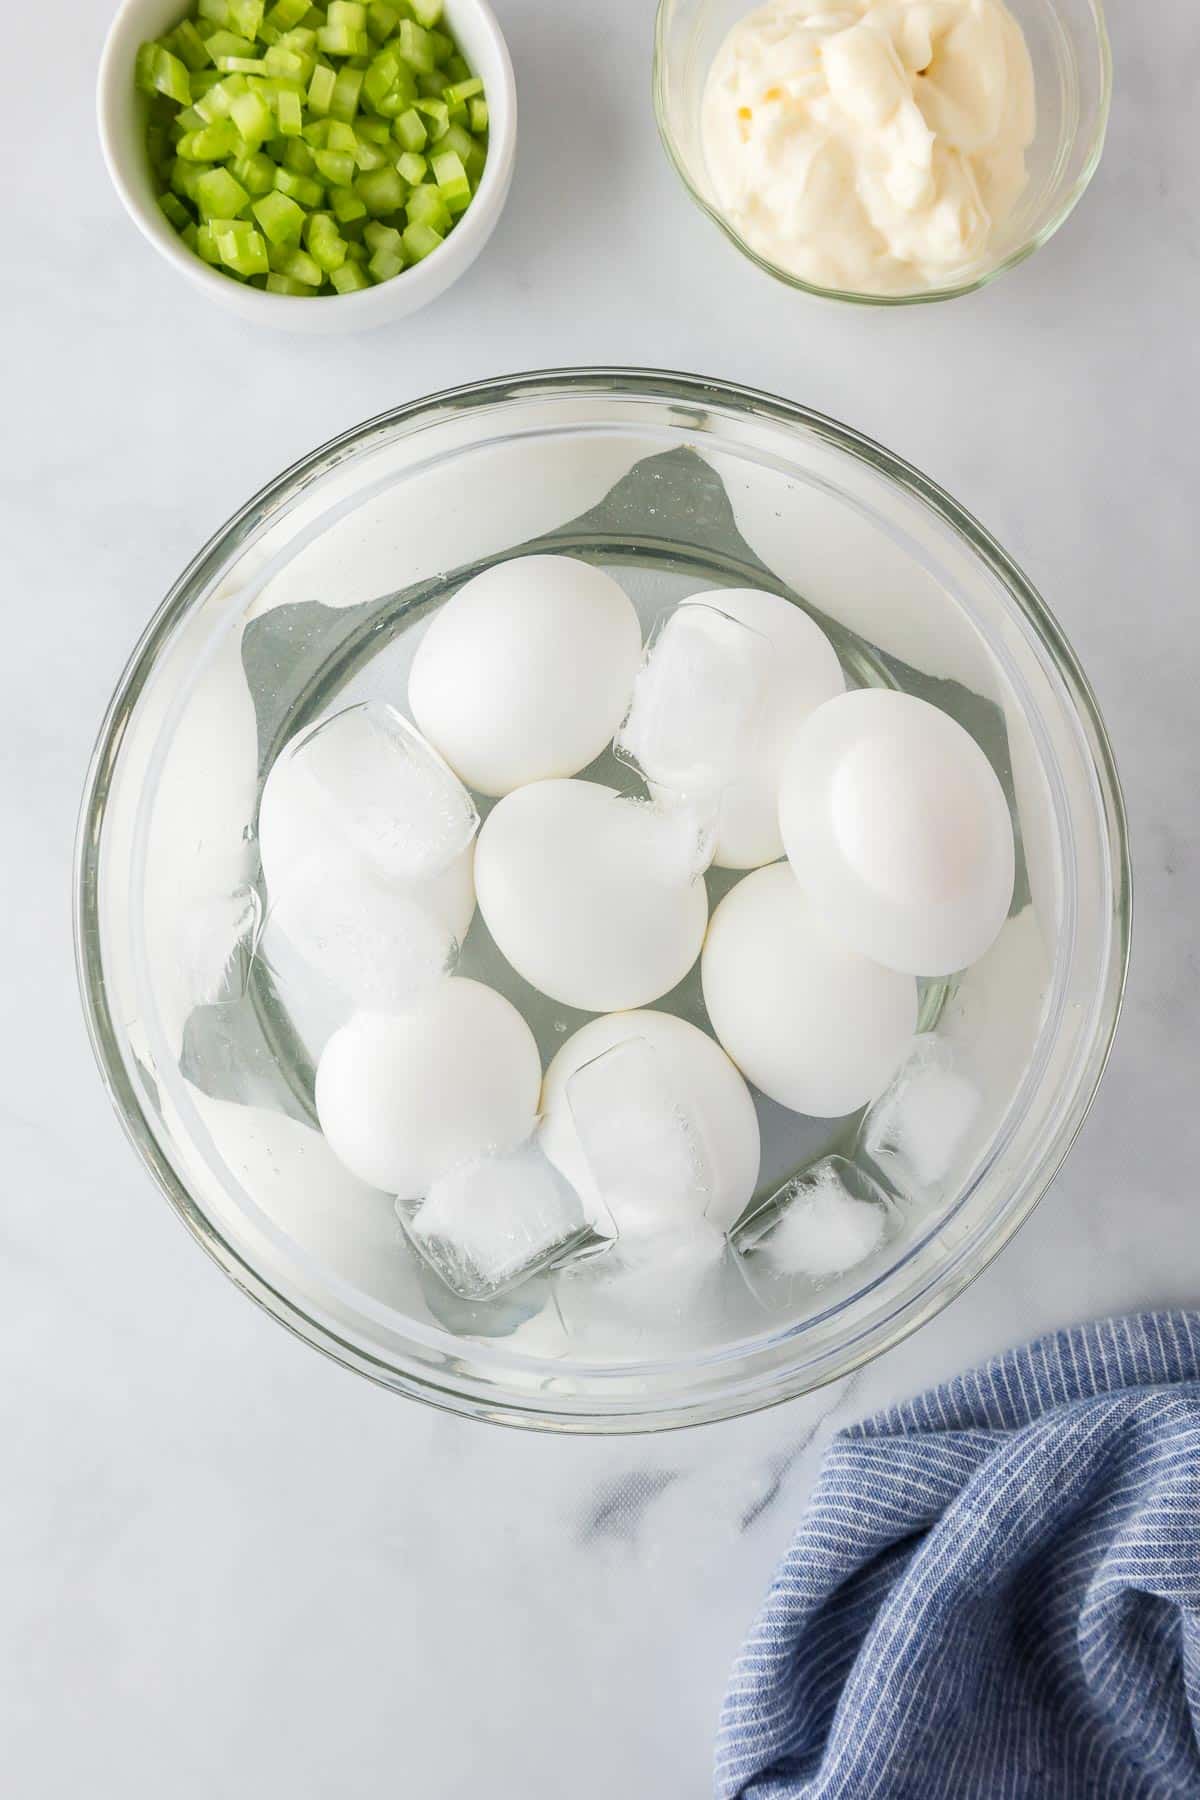 A bowl of hard-boiled eggs cooling in ice water, with bowls of chopped celery and mayonnaise nearby for egg salad.